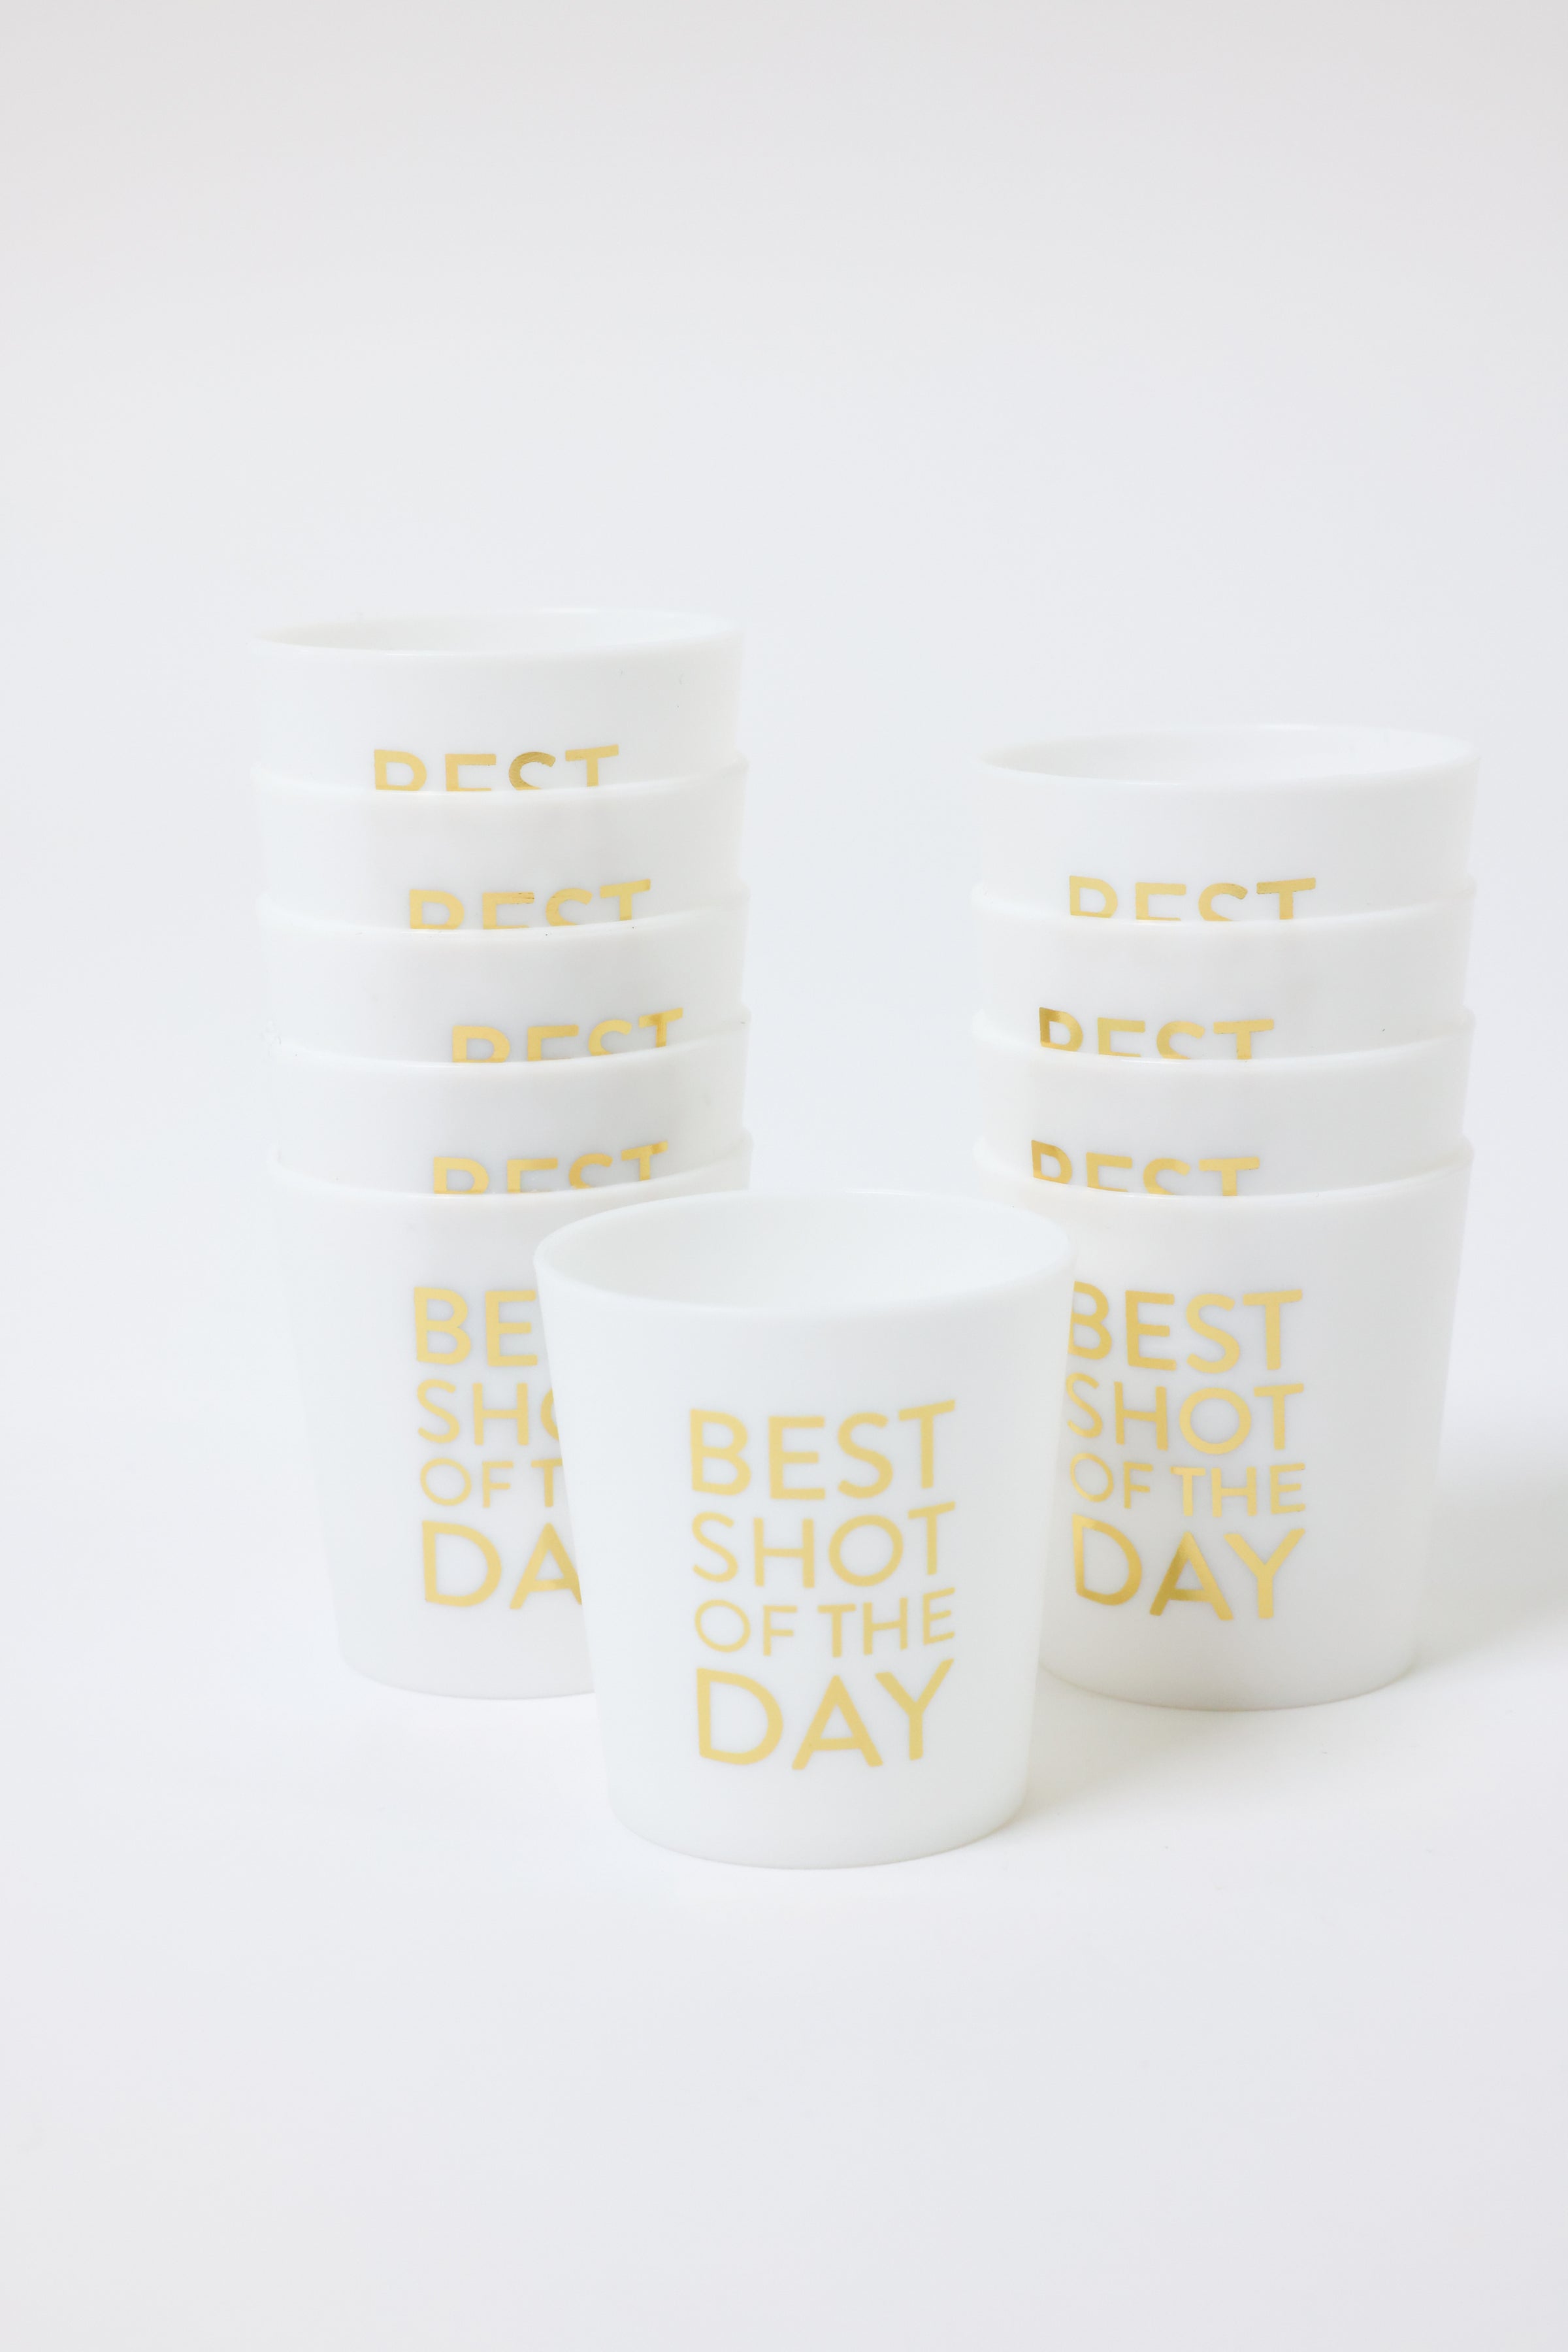 Best Shot of the Day Shot Cups